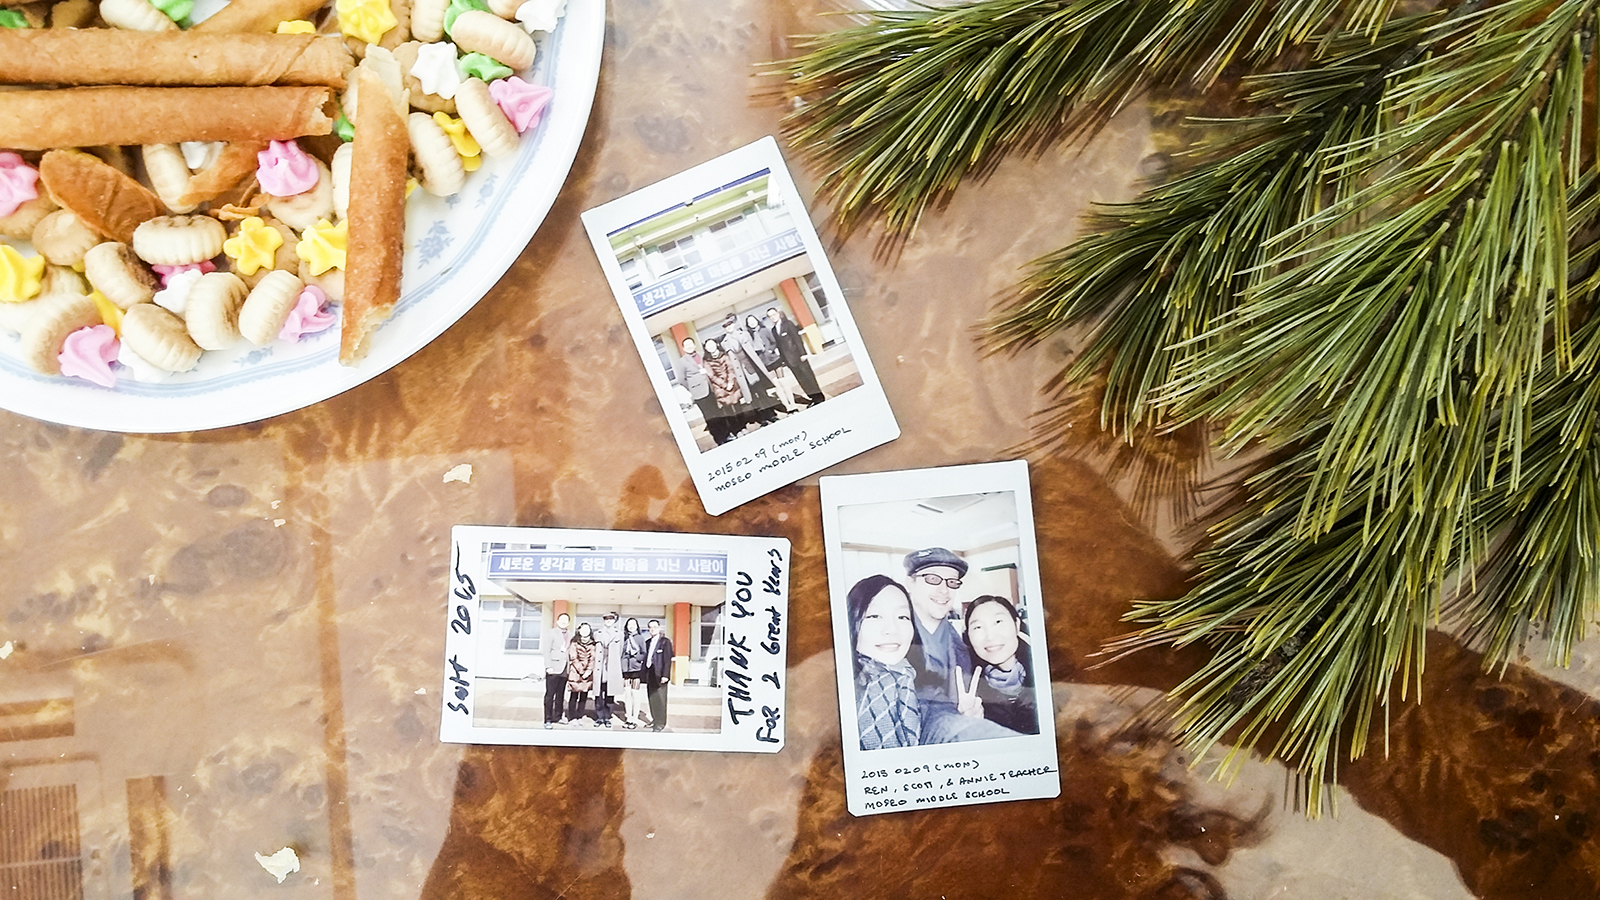 Fujifilm Instax photos with faculty of mountainside middle school against snacks from Singapore.